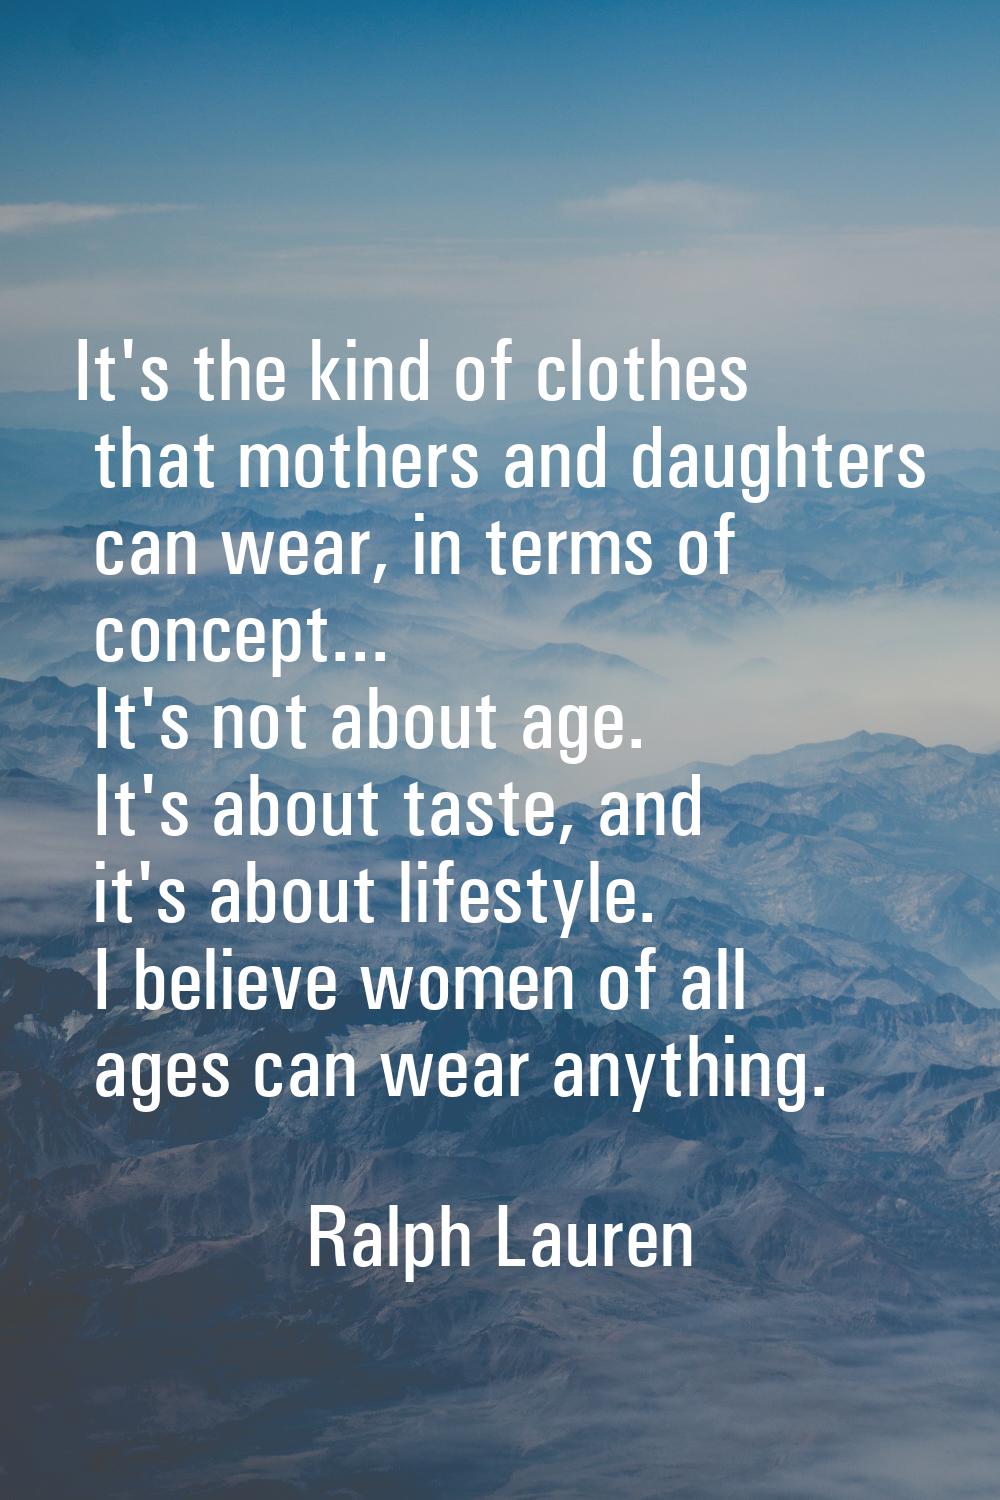 It's the kind of clothes that mothers and daughters can wear, in terms of concept... It's not about